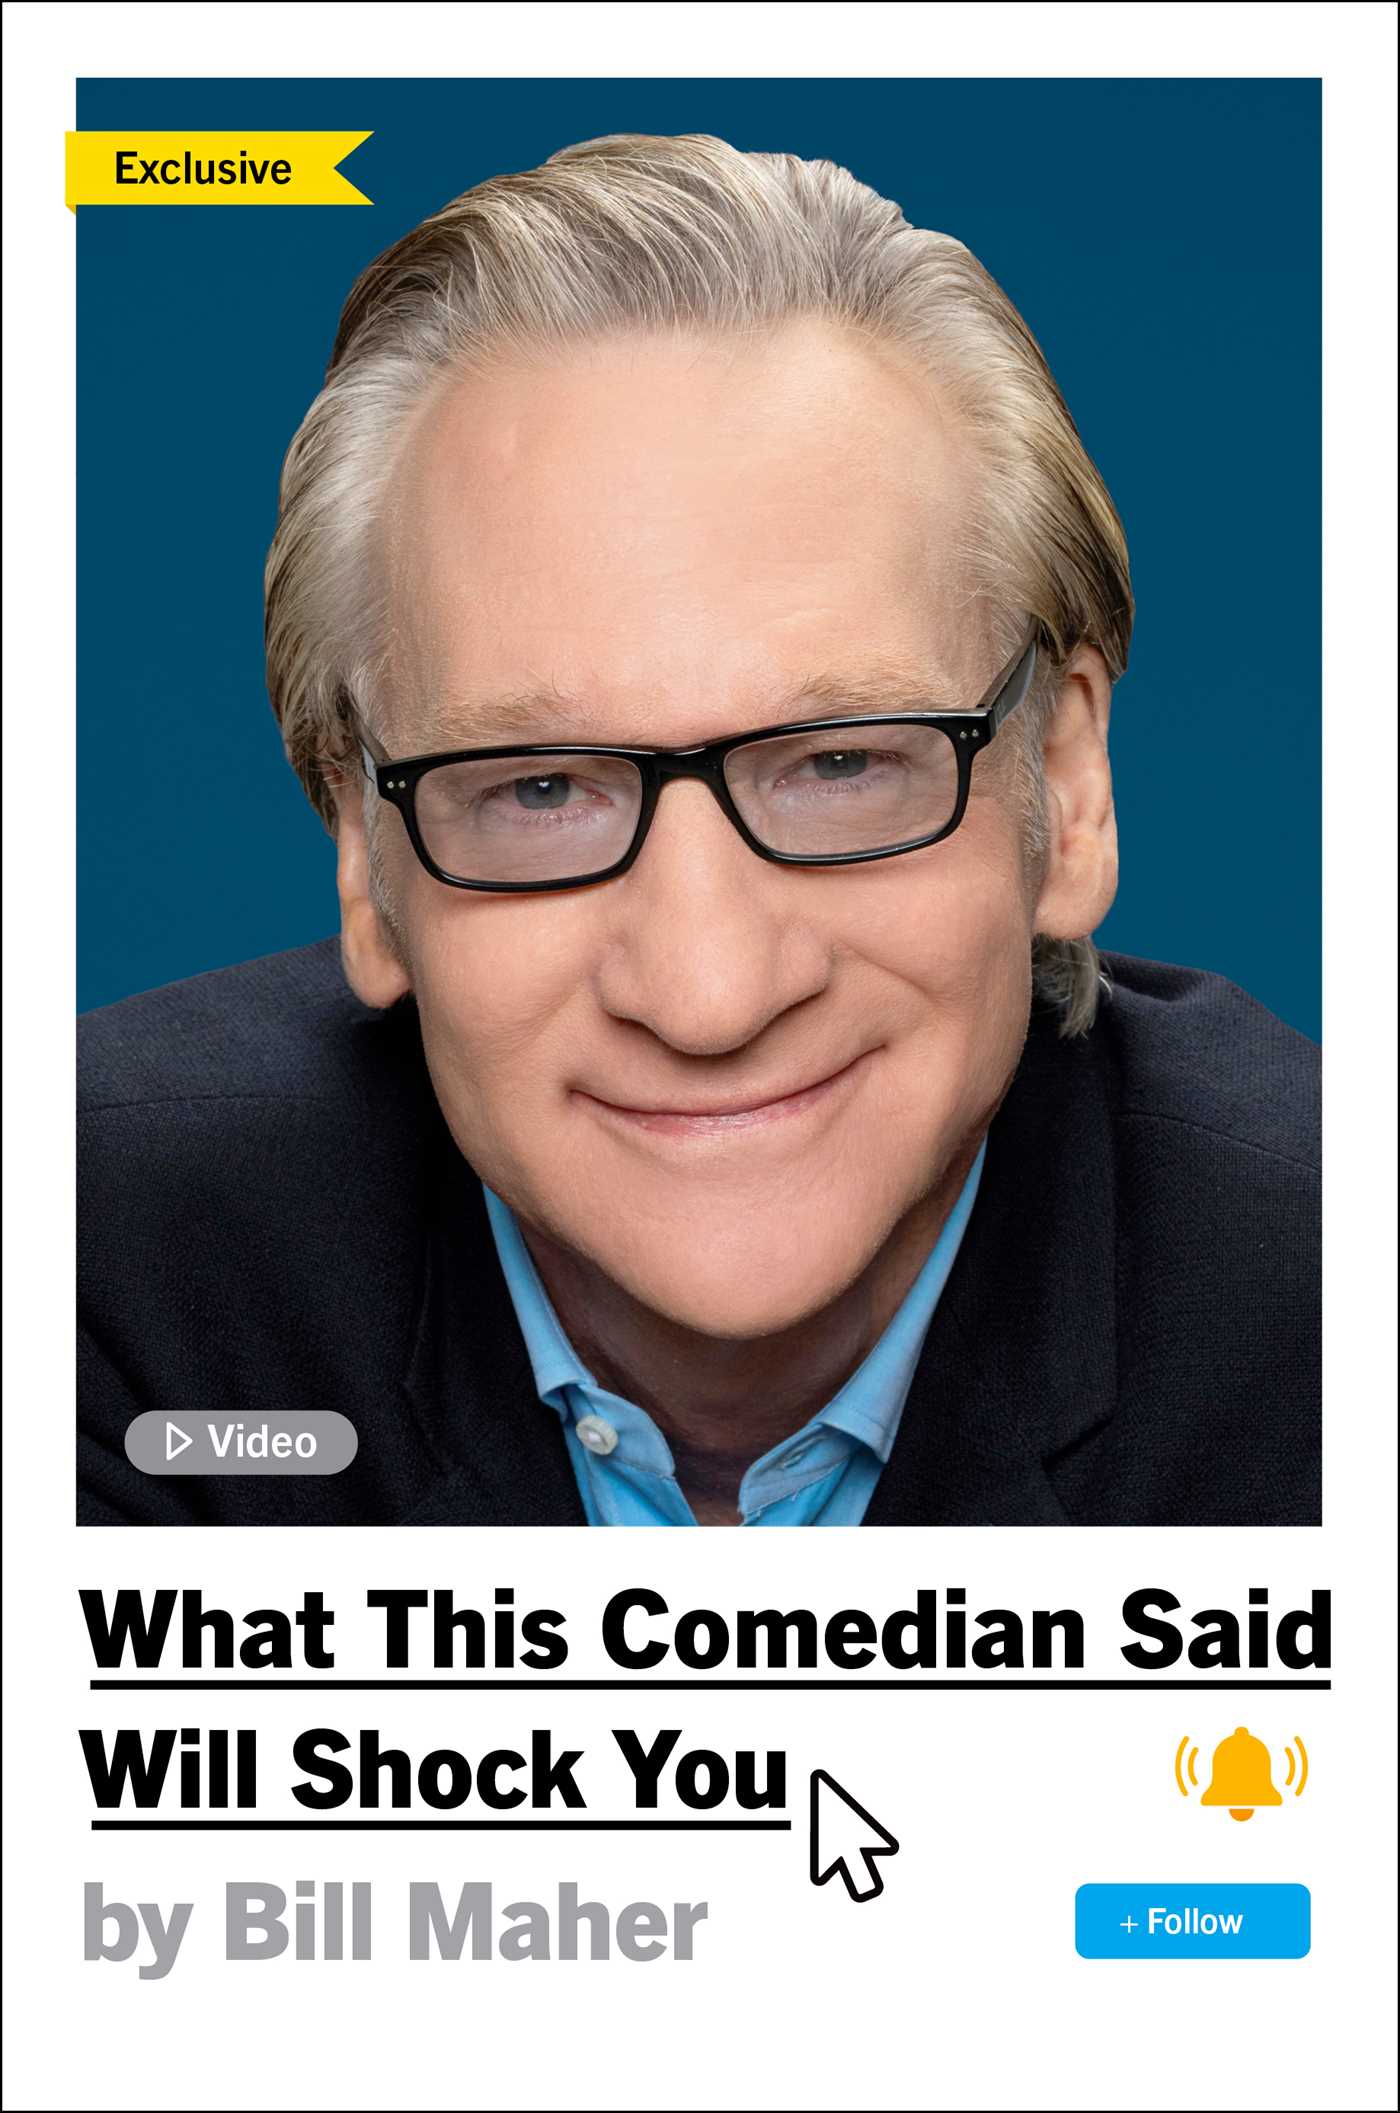 Image for "What This Comedian Said Will Shock You"